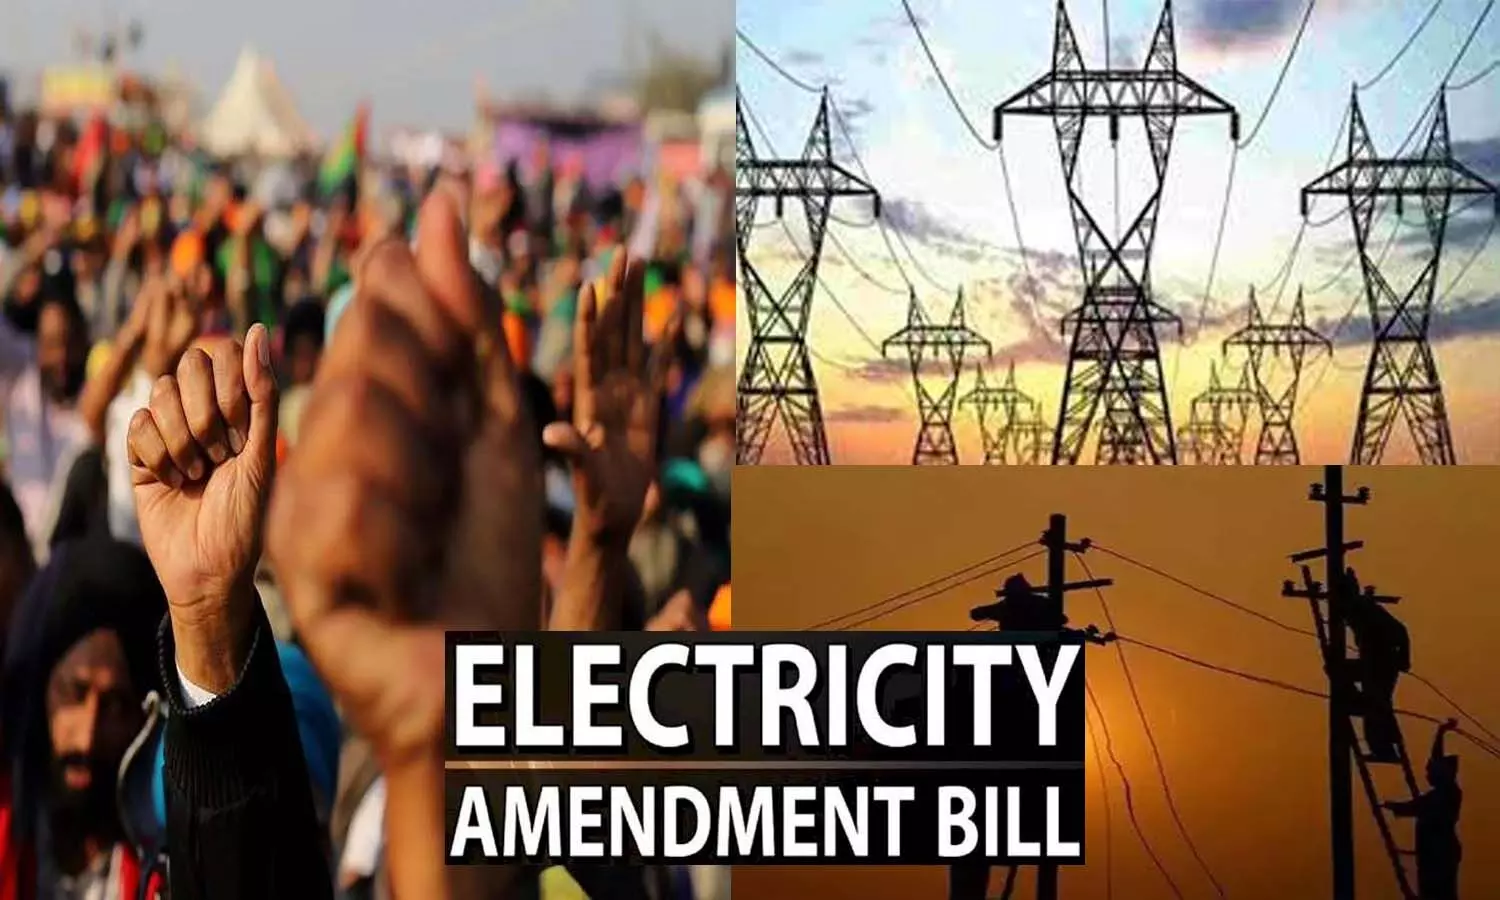 Electricity employees protest against Electricity Amendment Bill 2022, warning to stop work across the country